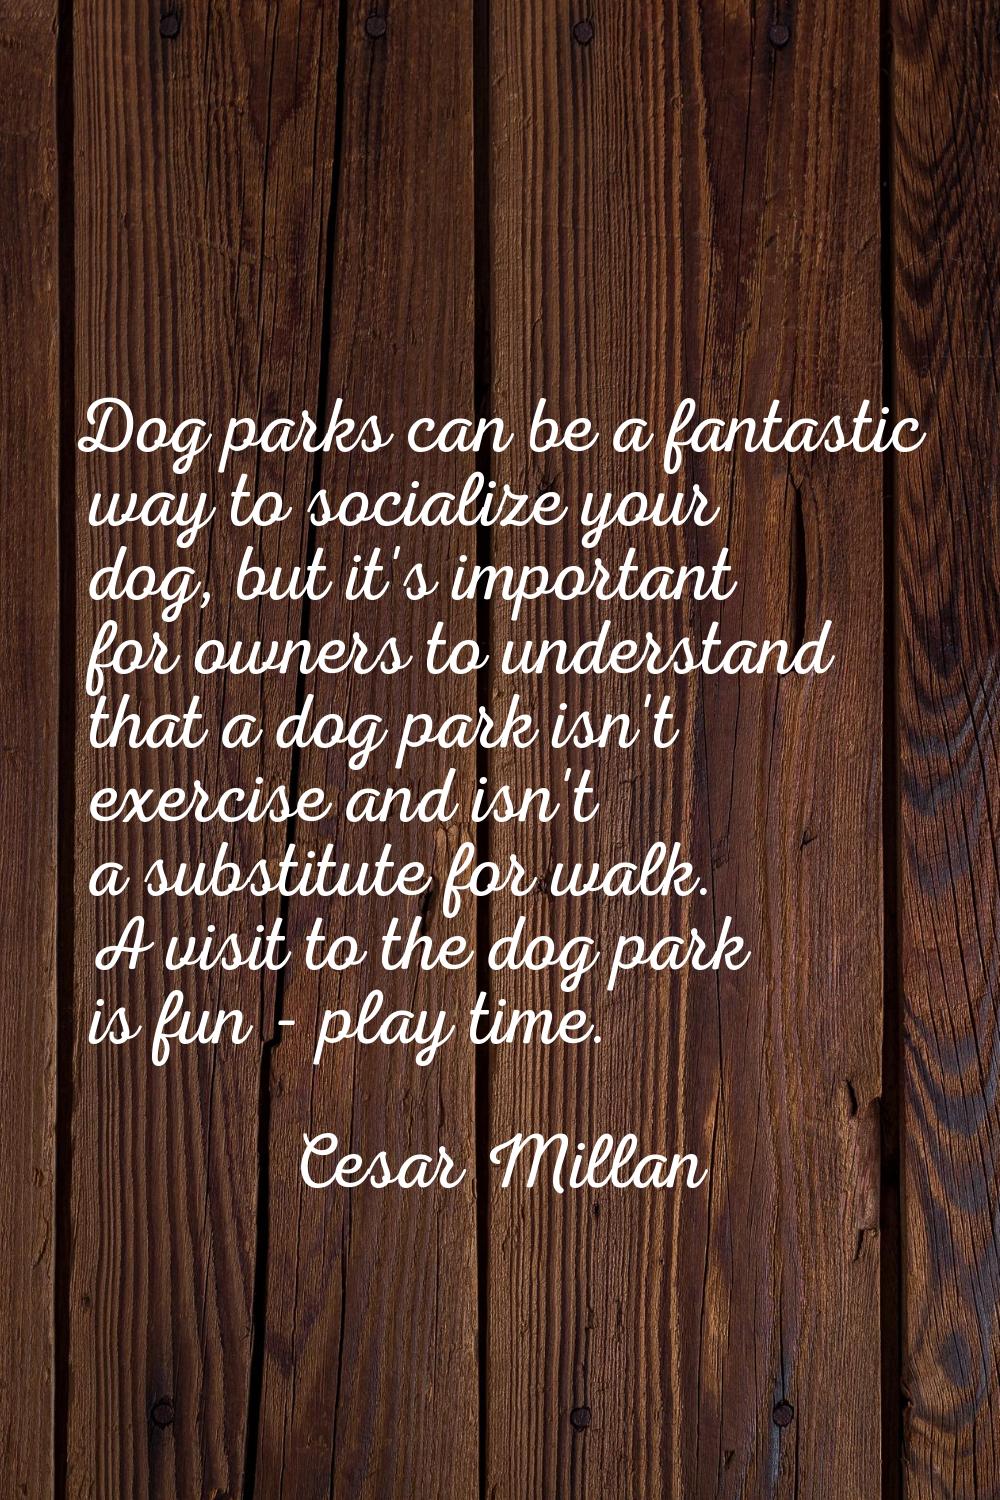 Dog parks can be a fantastic way to socialize your dog, but it's important for owners to understand